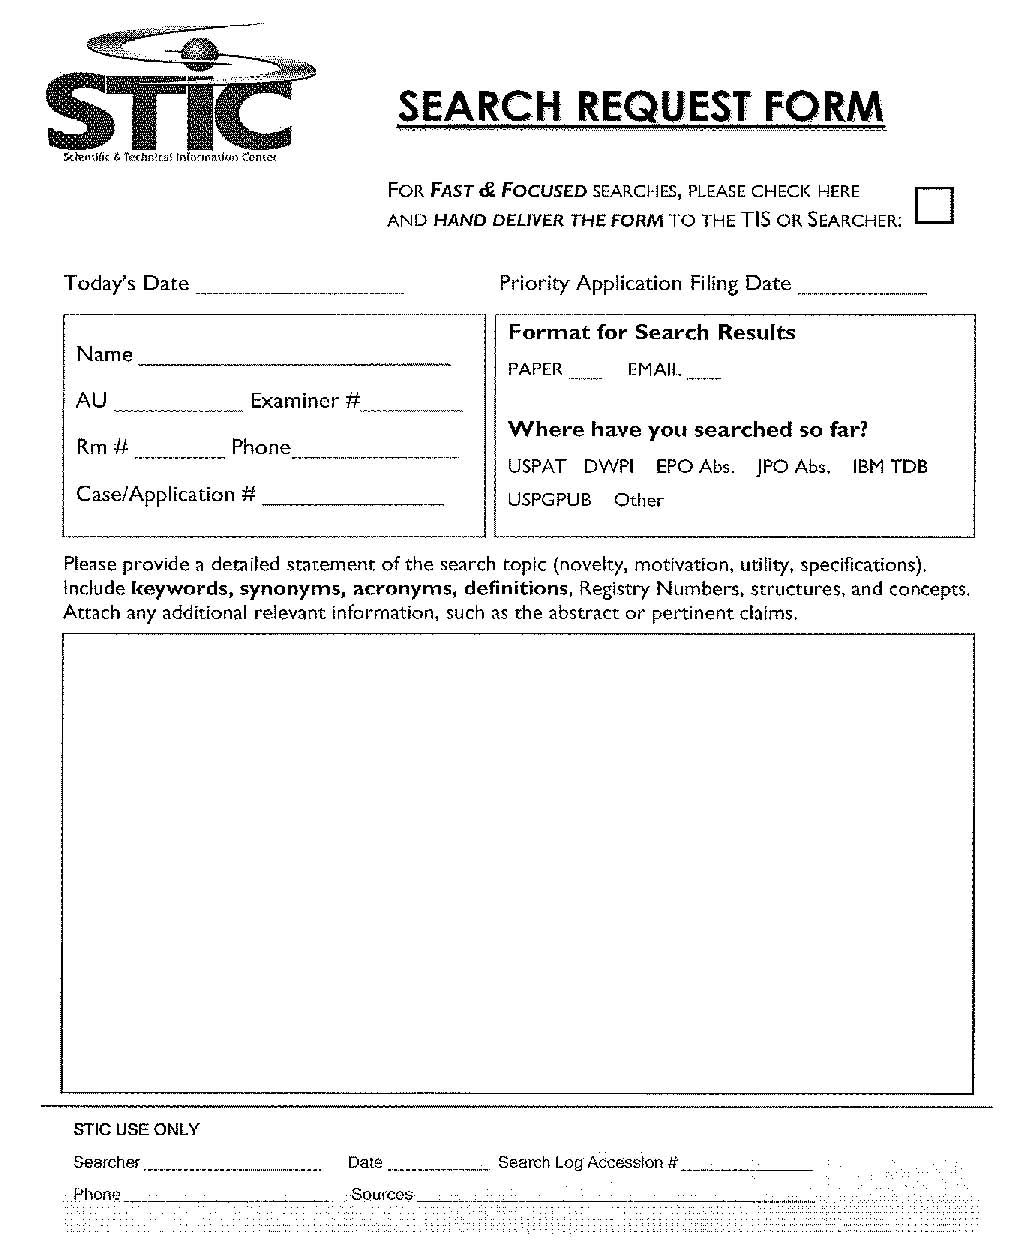 form pto 1590. search request form